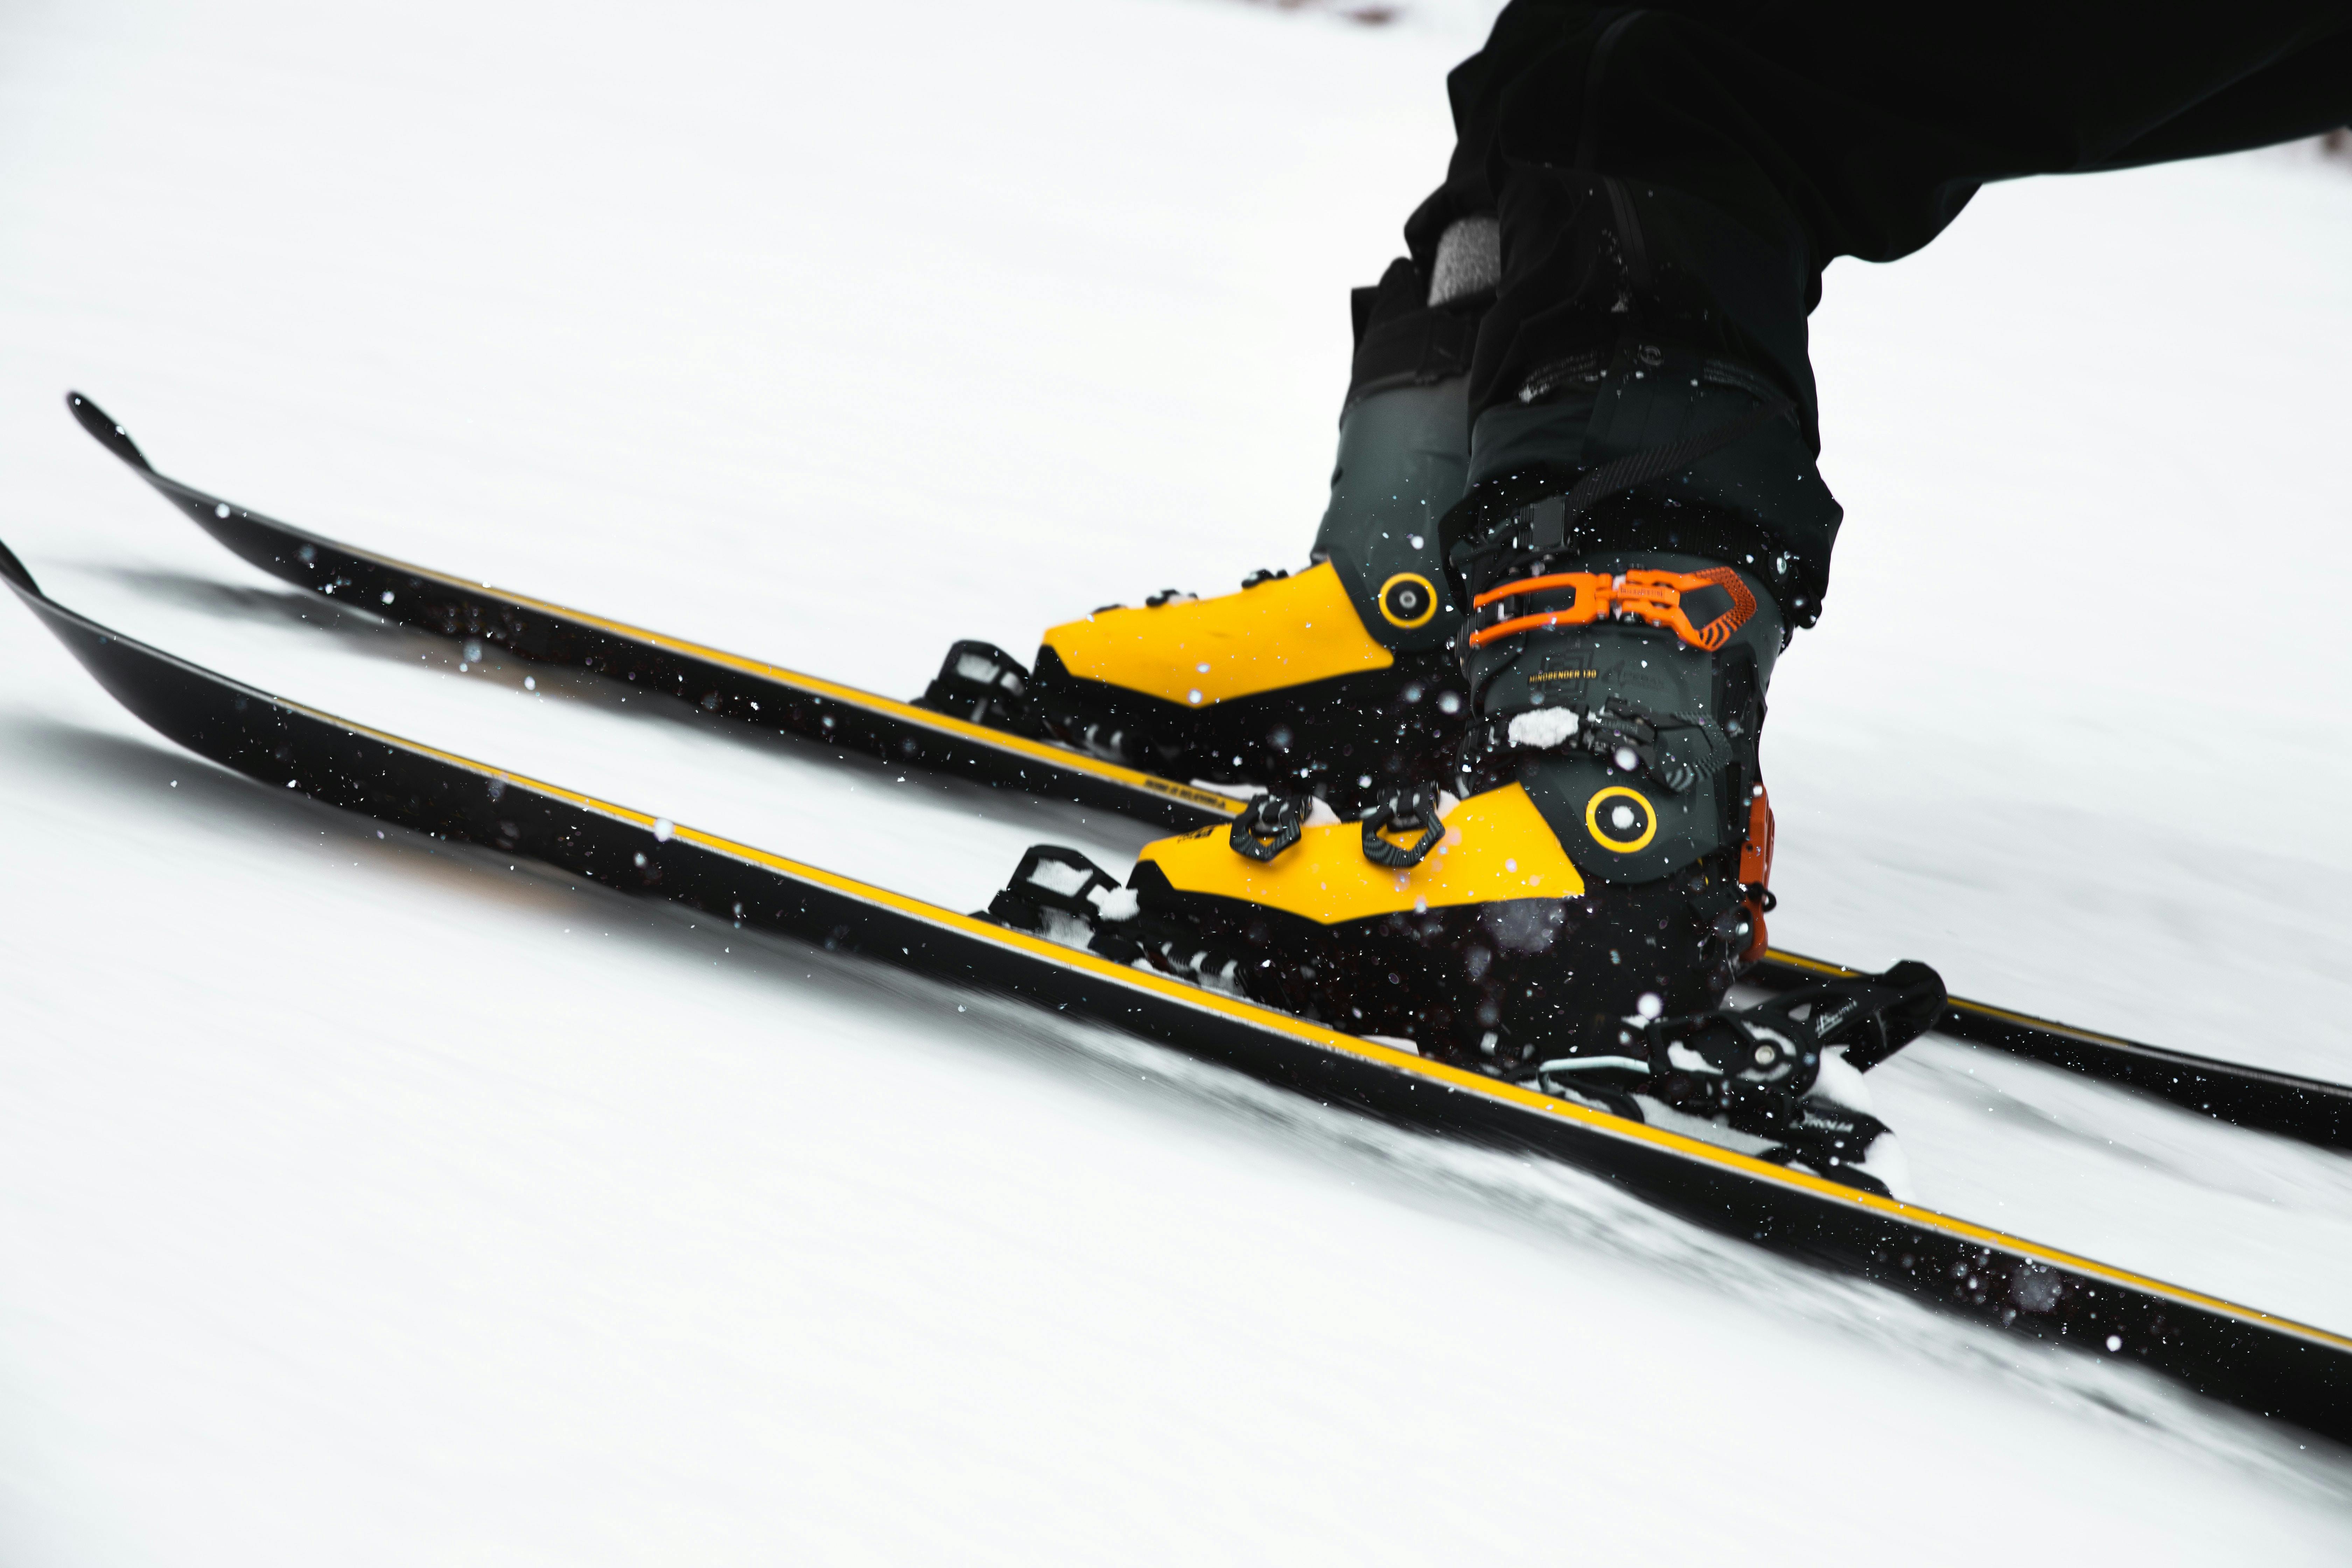 How Tight Should Ski Boots Be - Finding The Perfect Fit